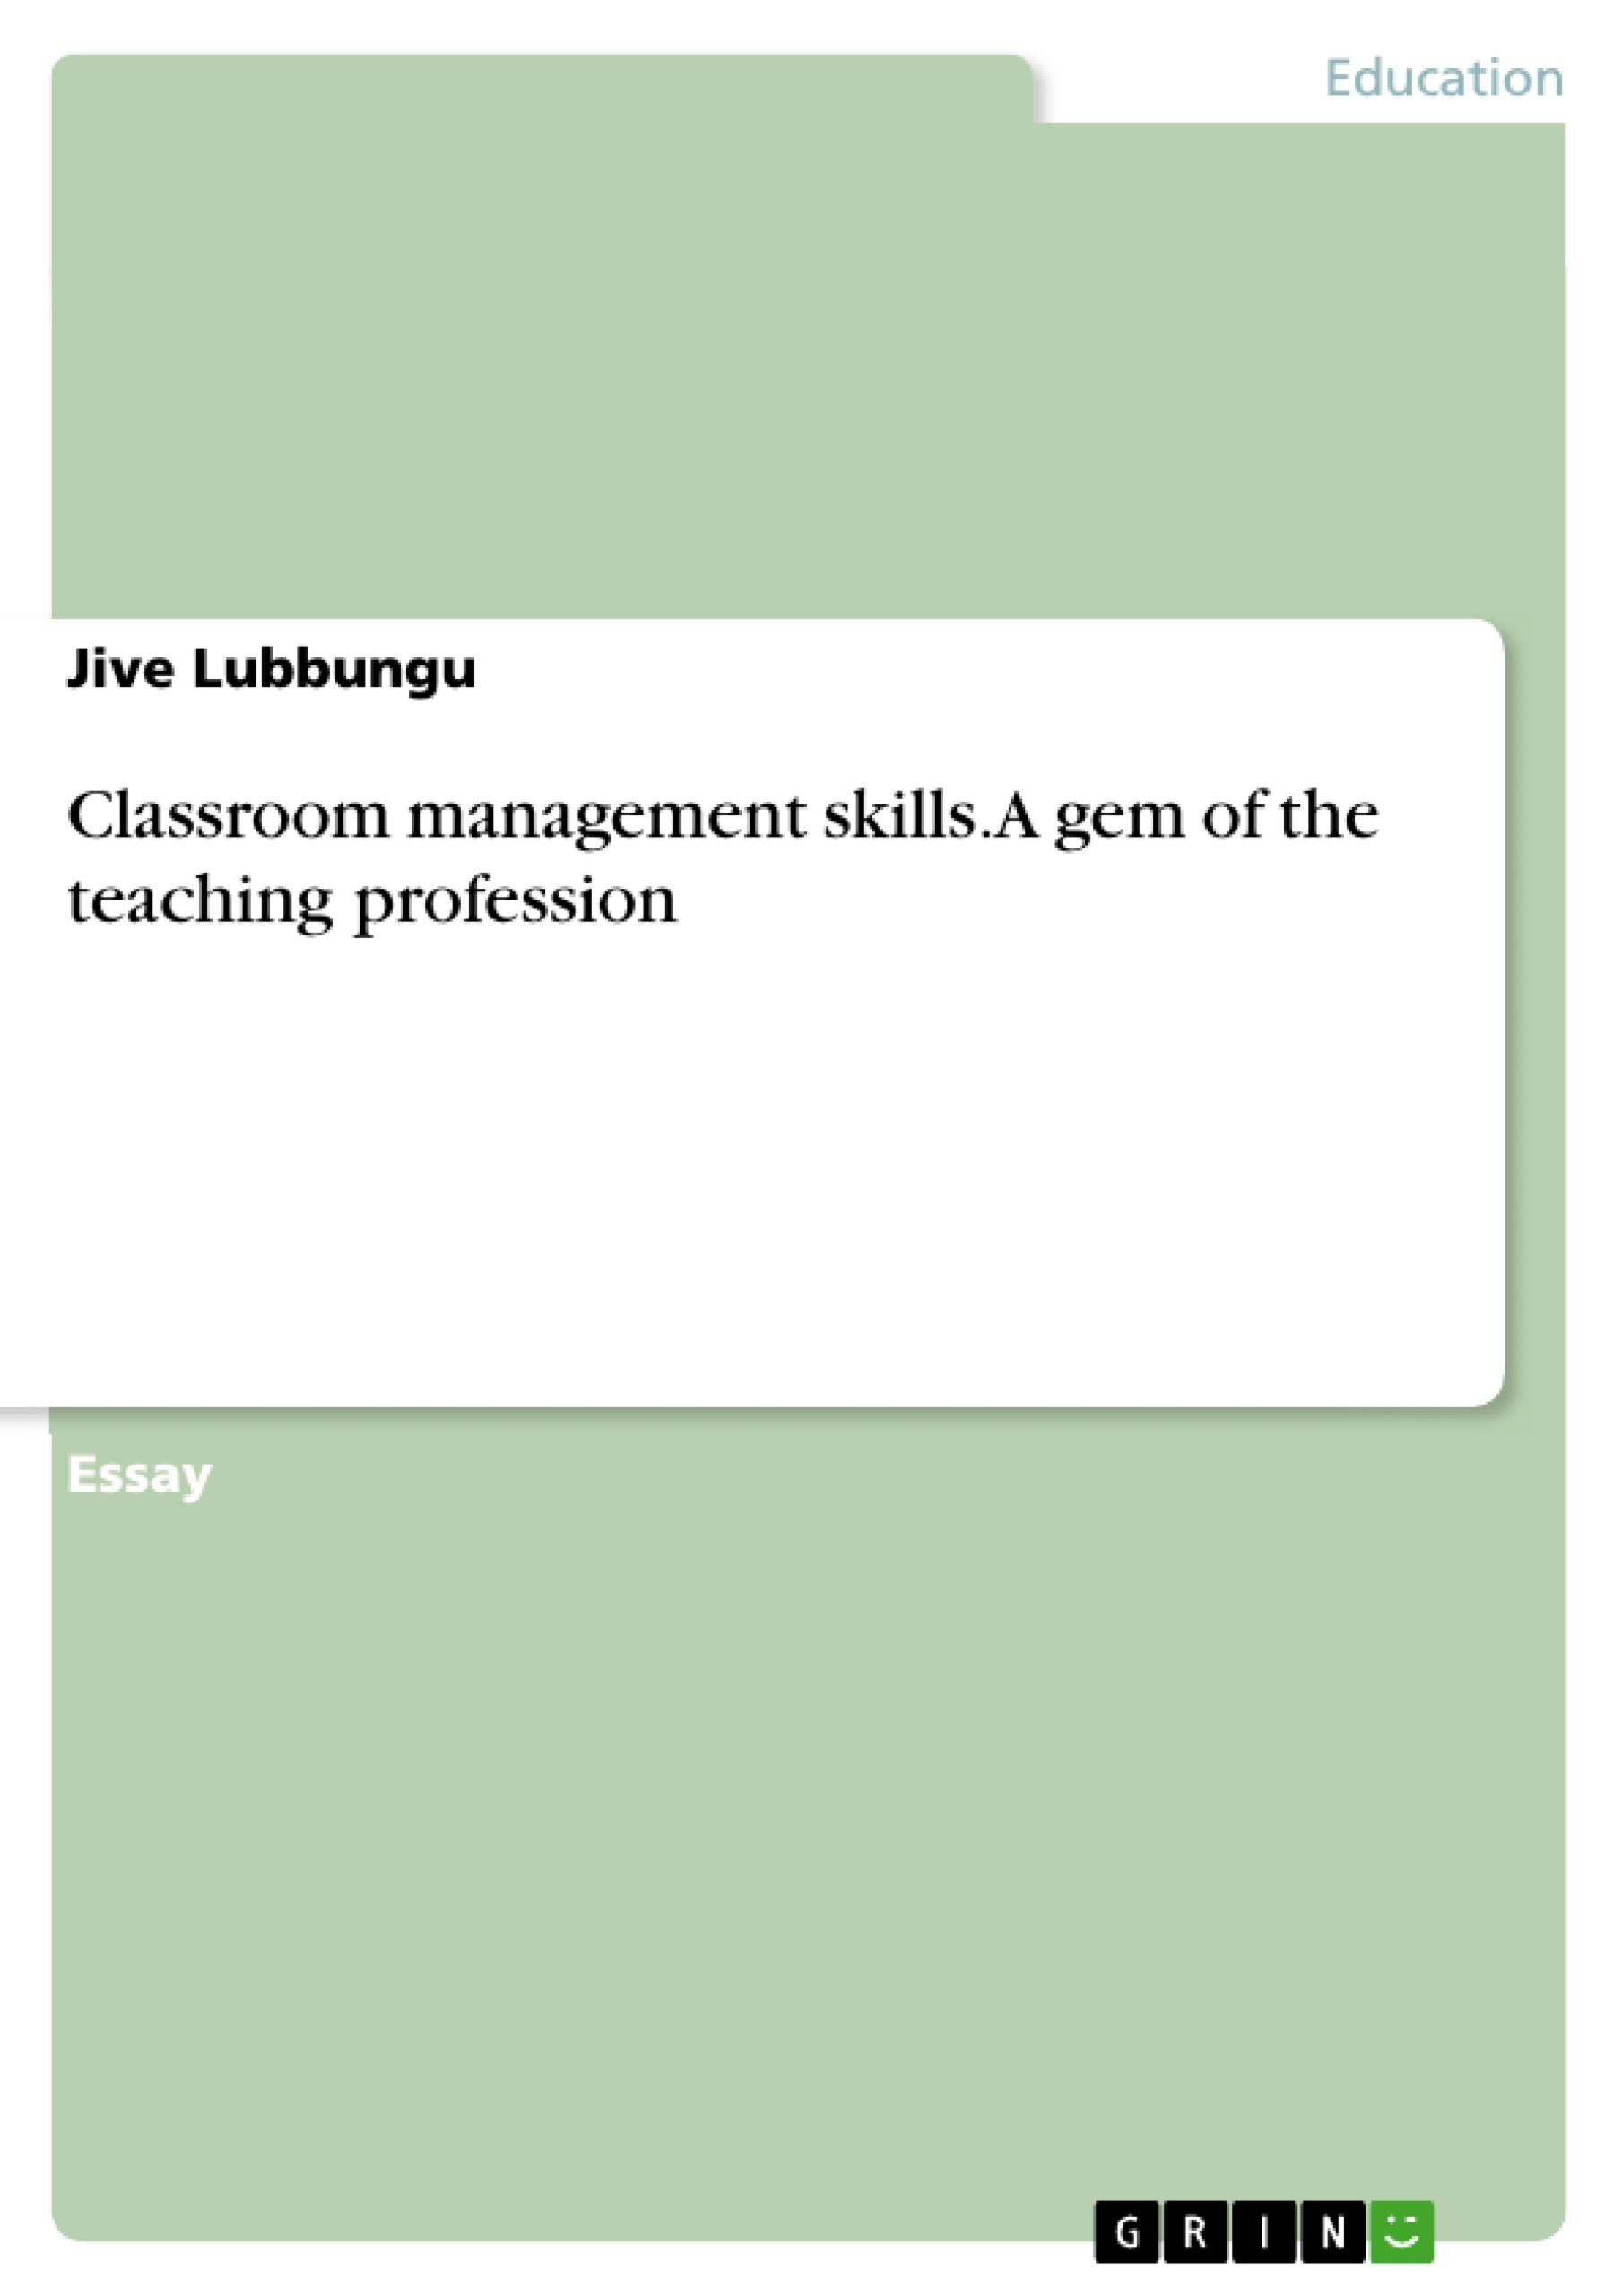 Title: Classroom management skills. A gem of the teaching profession